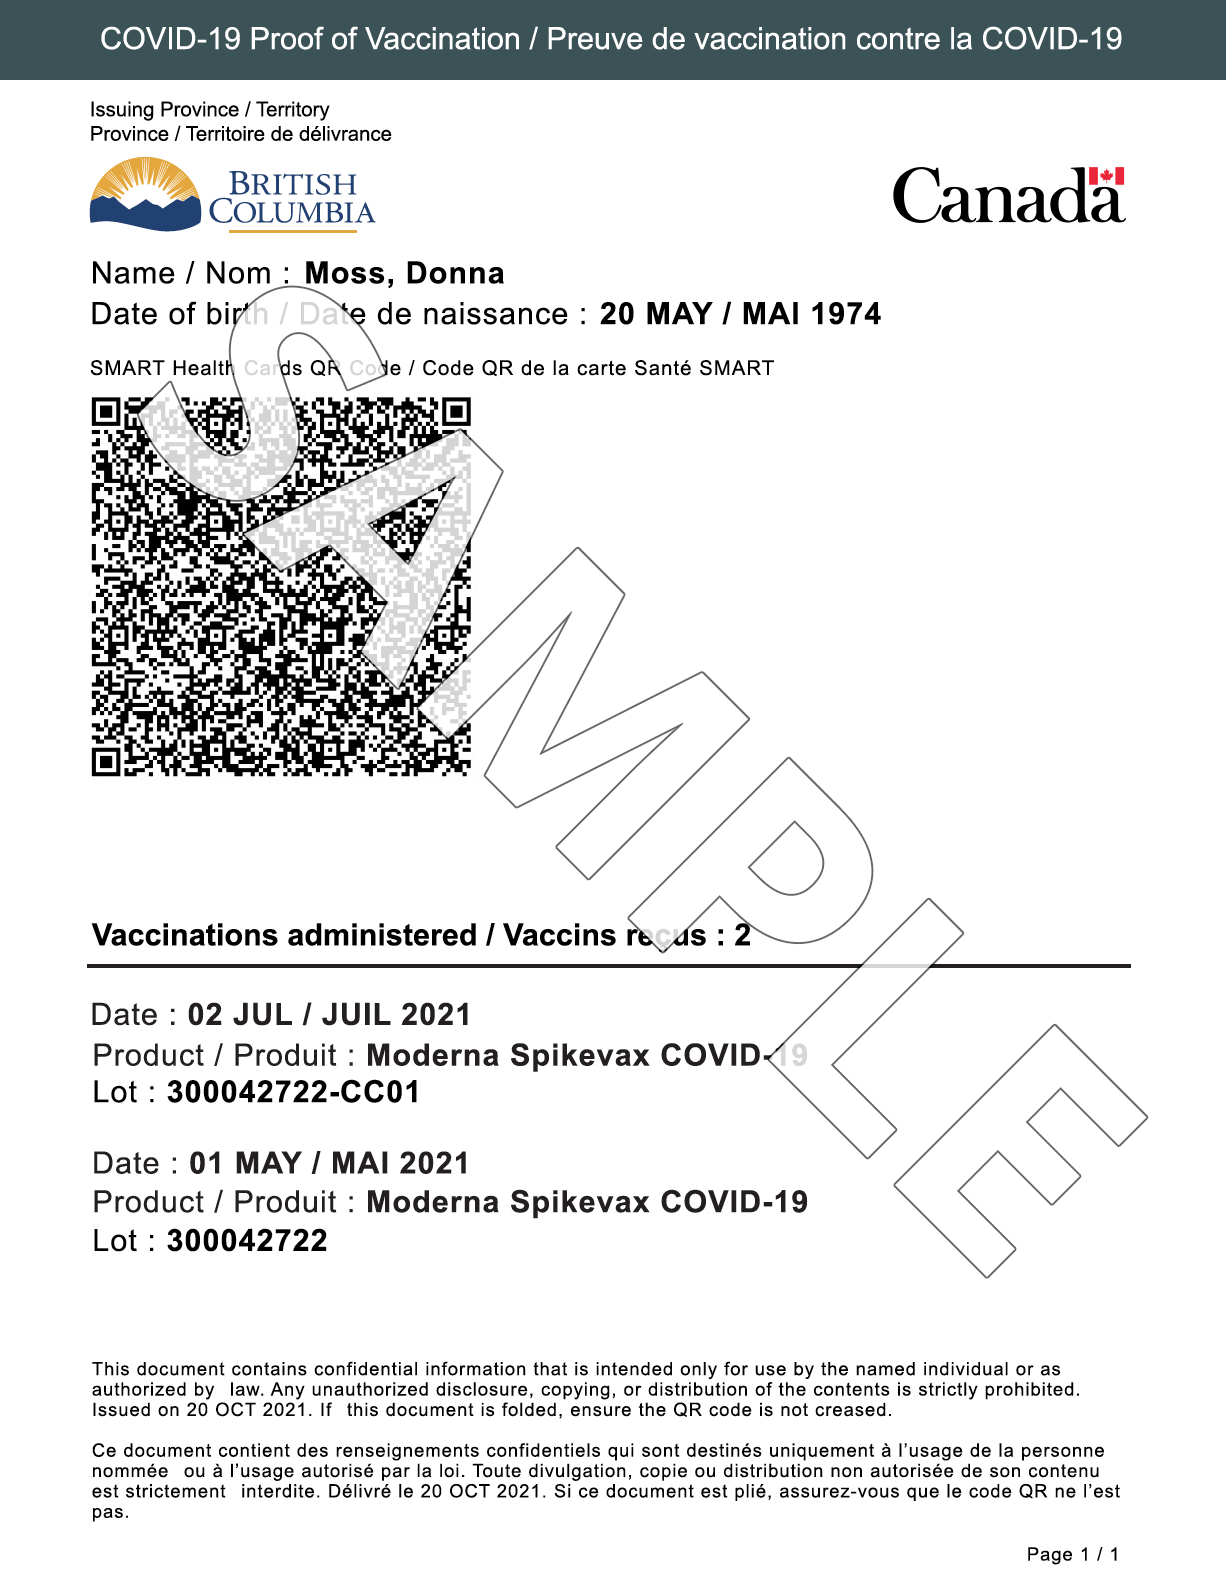 An example of the Canadian COVID-19 proof of vaccination document